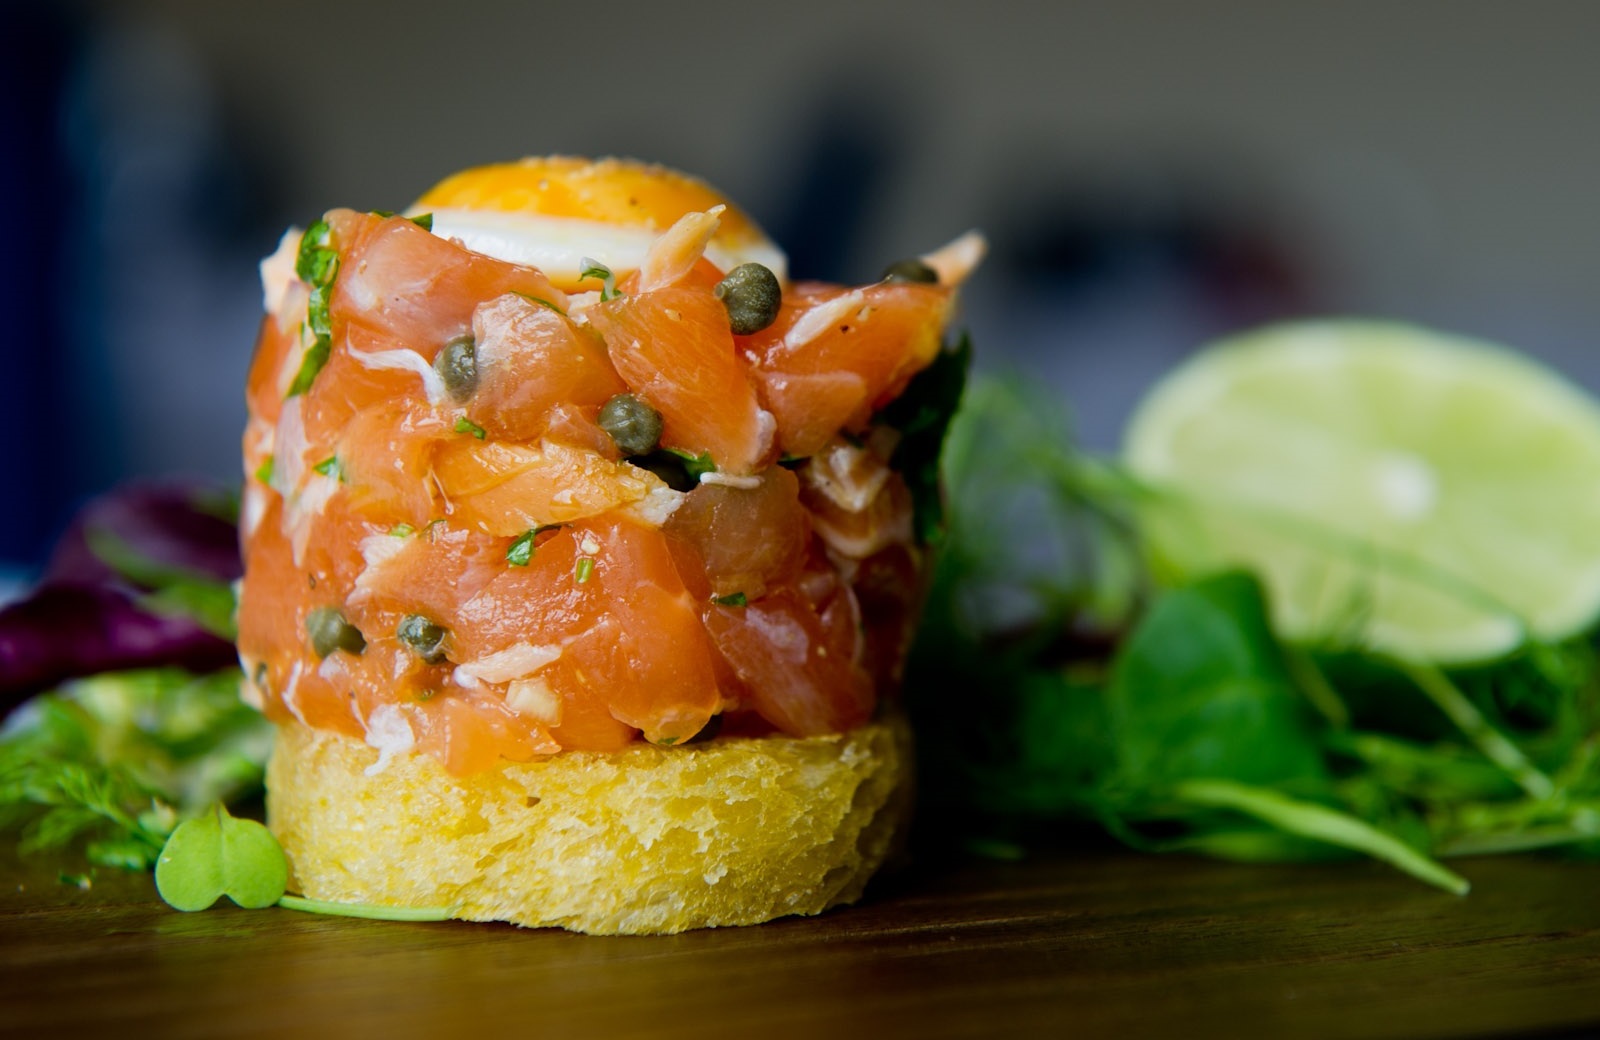 What’s Your IQ, Based Only on Your Dinner Choices? Smoked salmon tartare